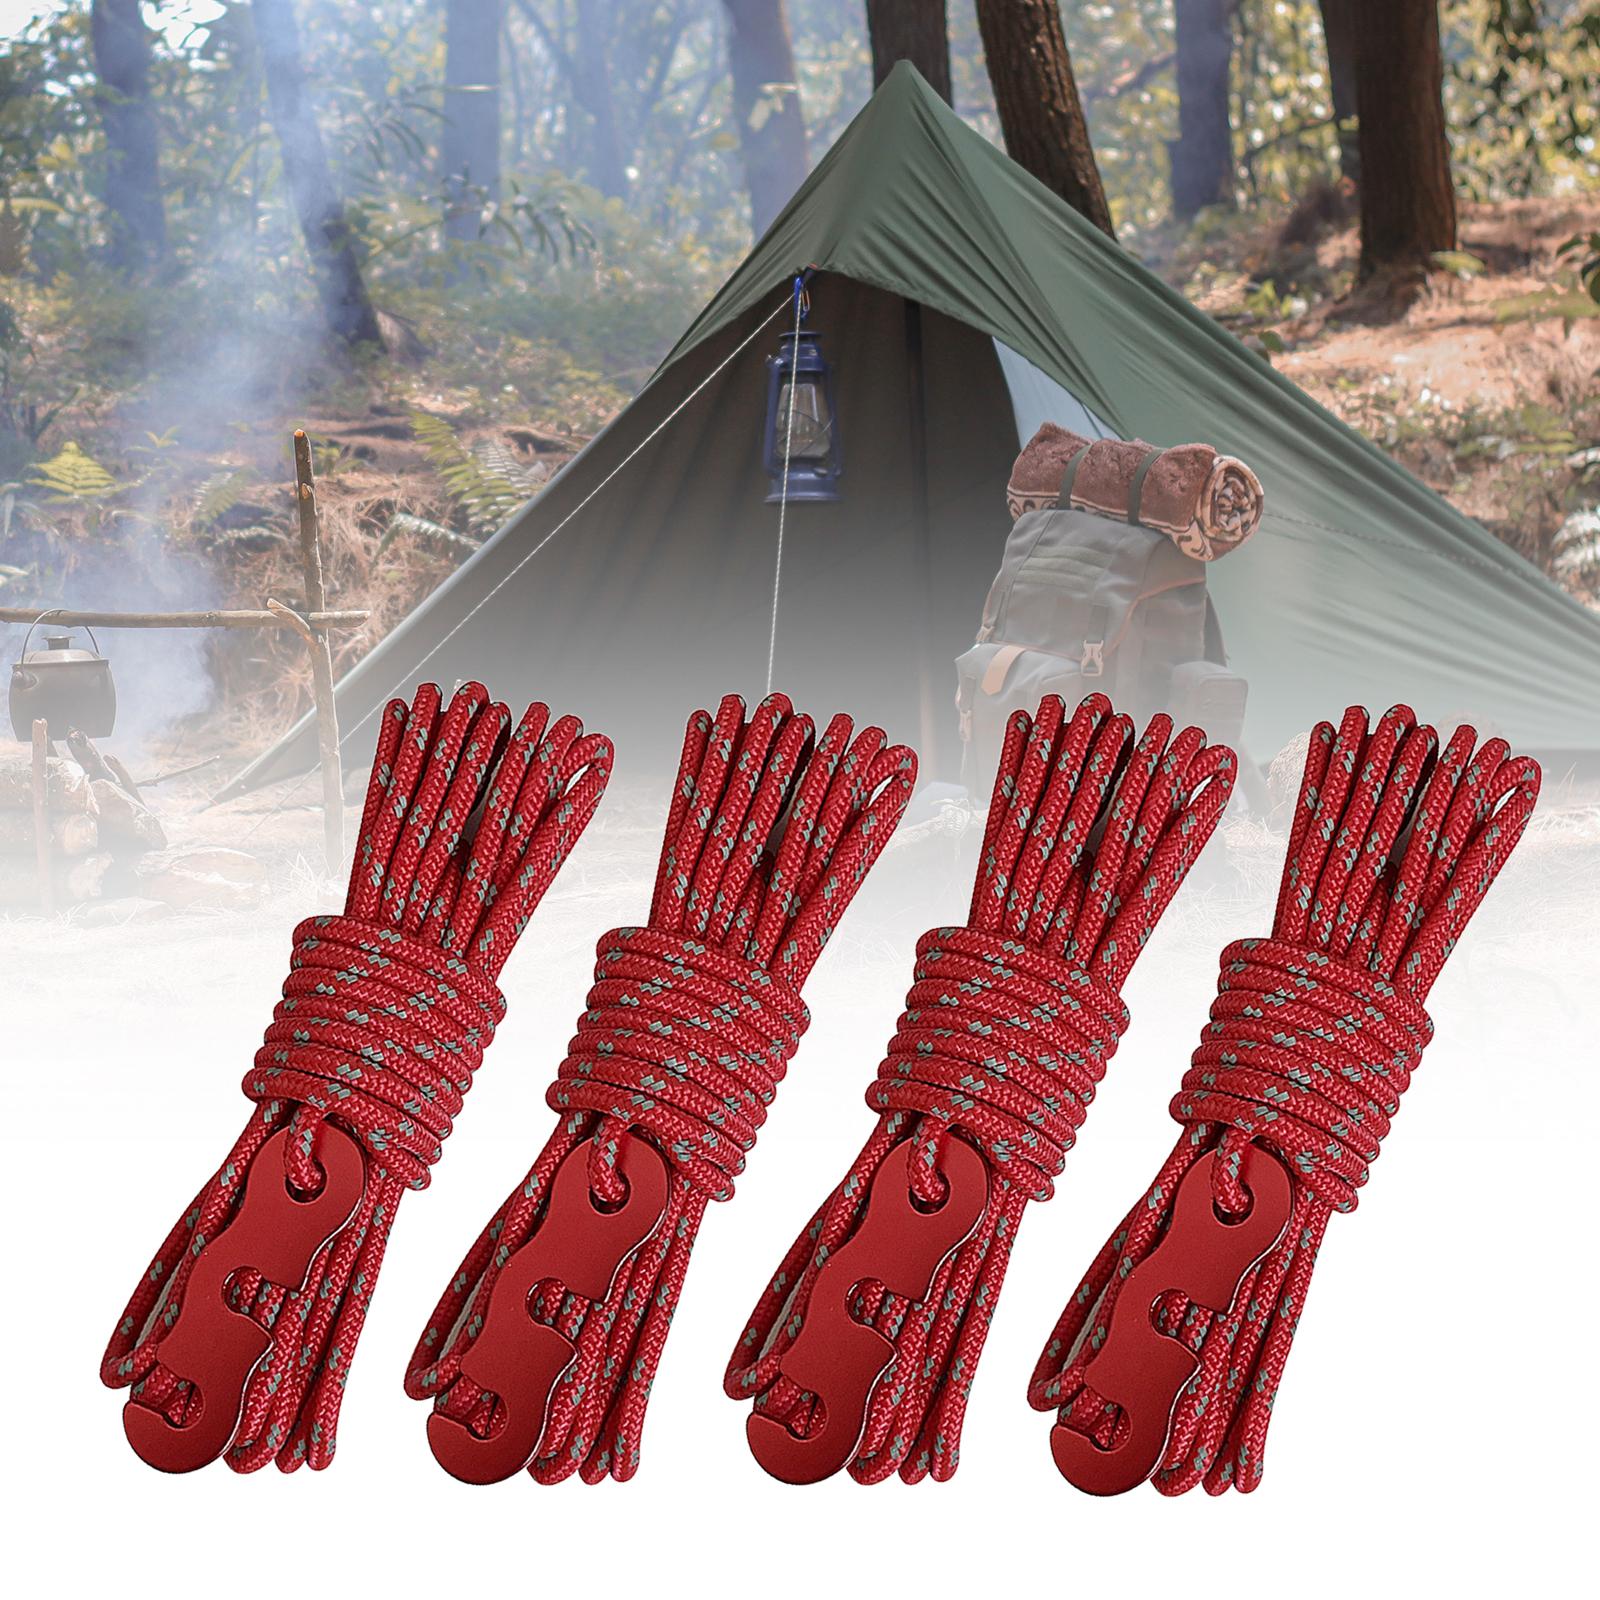 4x Camping Tent Cords Hiking Picnic Survival Gear Activity Outdoor Guy Lines Red